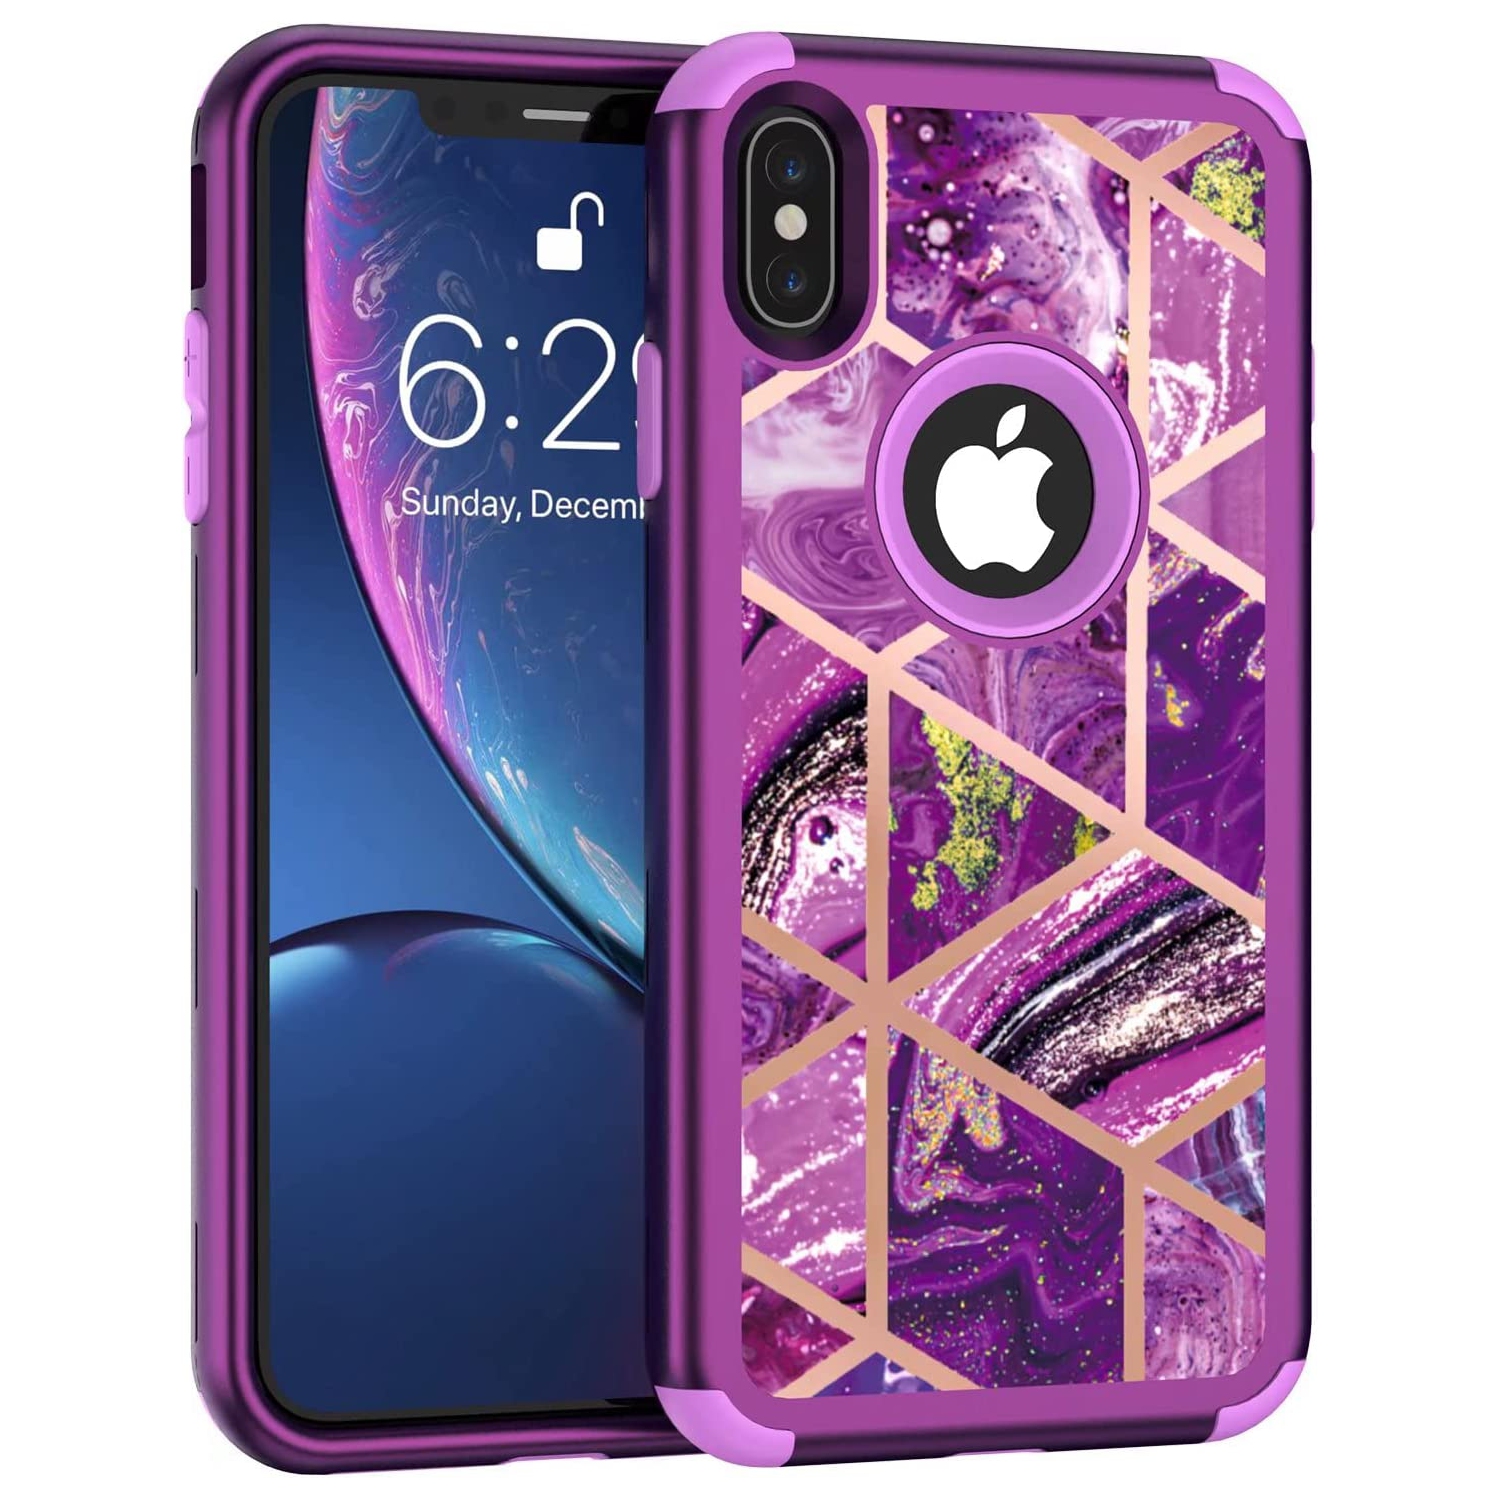 Heavy Duty Full-Body Armor Shockproof Bumper Hard Back Protective Geometric Marble Phone Case for iPhone XS Max A1921